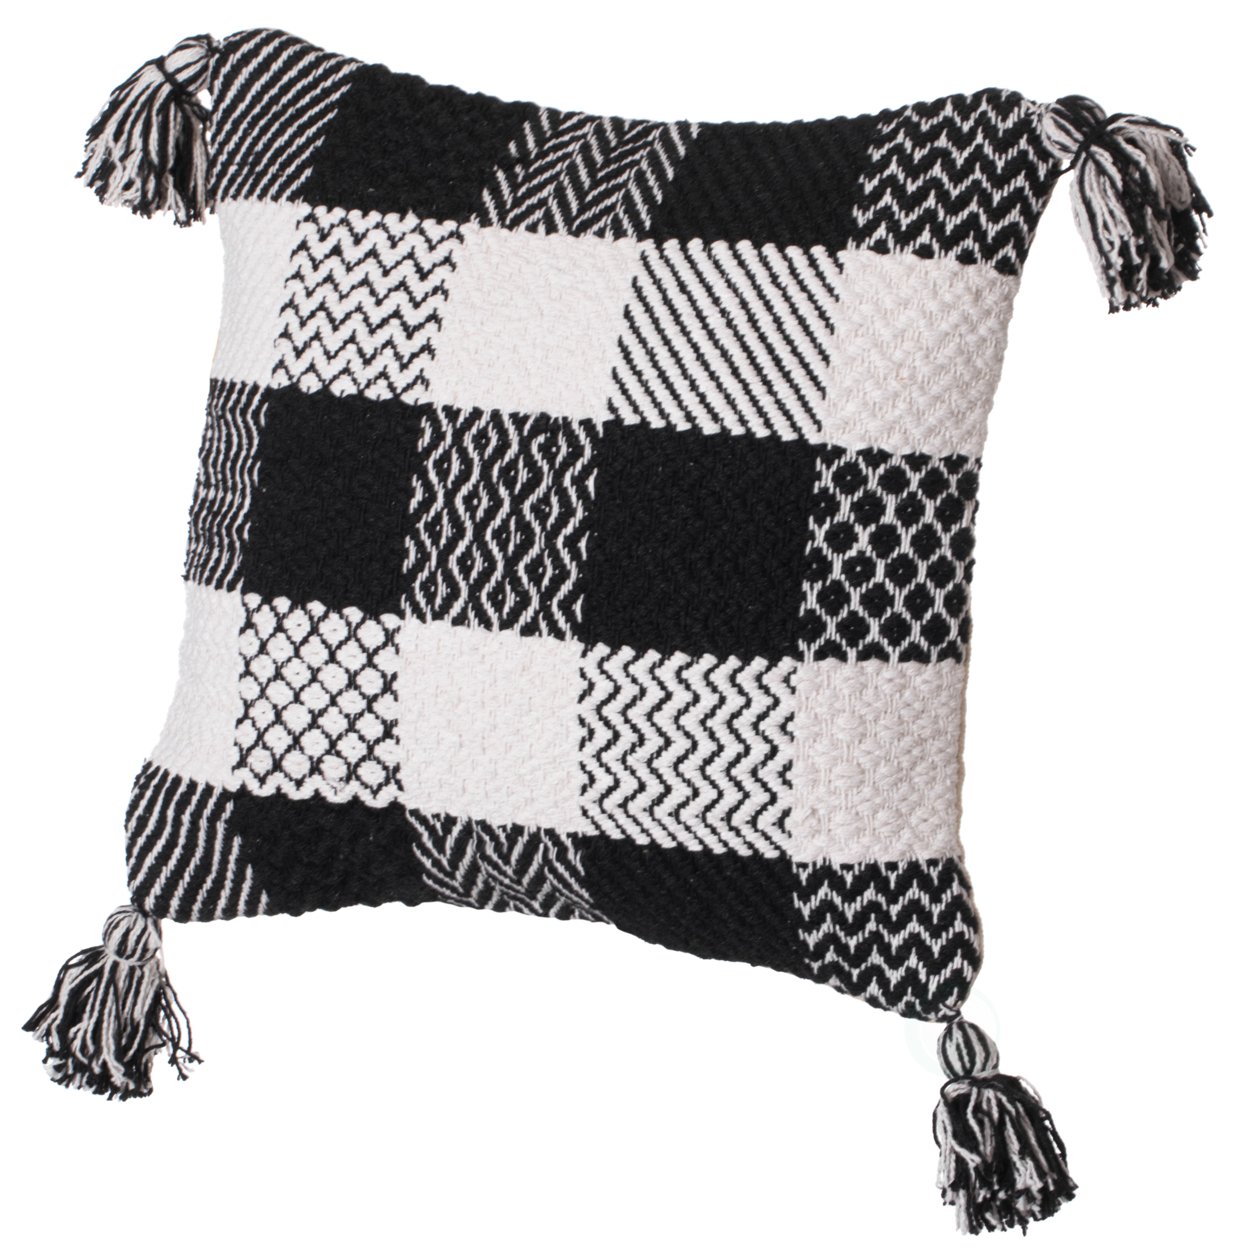 16" Handwoven Cotton Throw Pillow Cover Chevron & Gingham Design Black & White - gingham with cushion